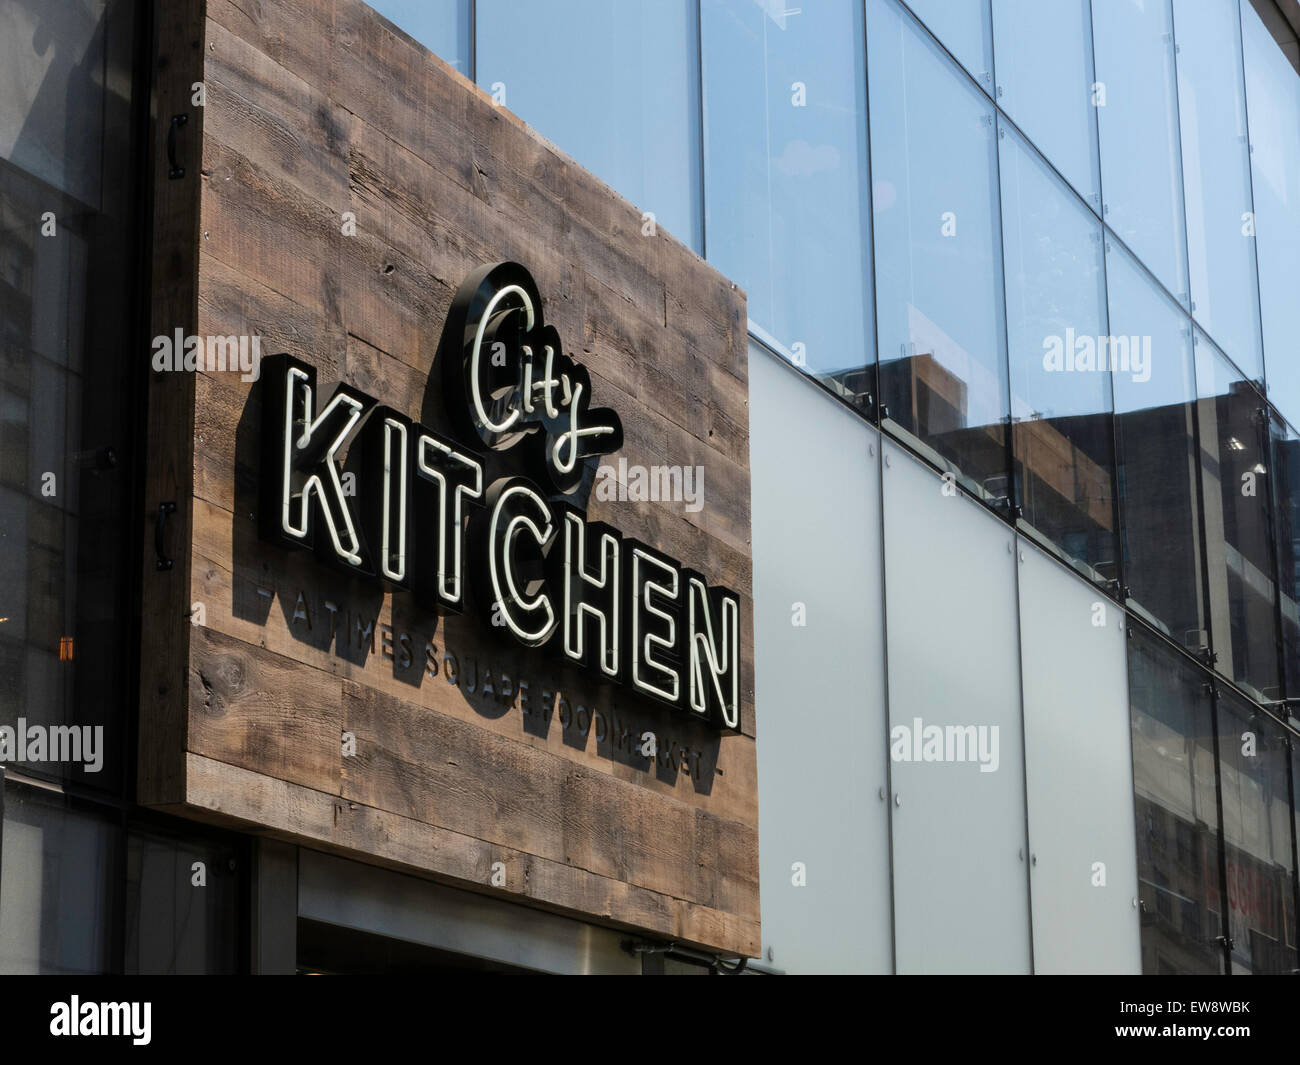 City Kitchen Food Market Times Square NYC Stock Photo Royalty